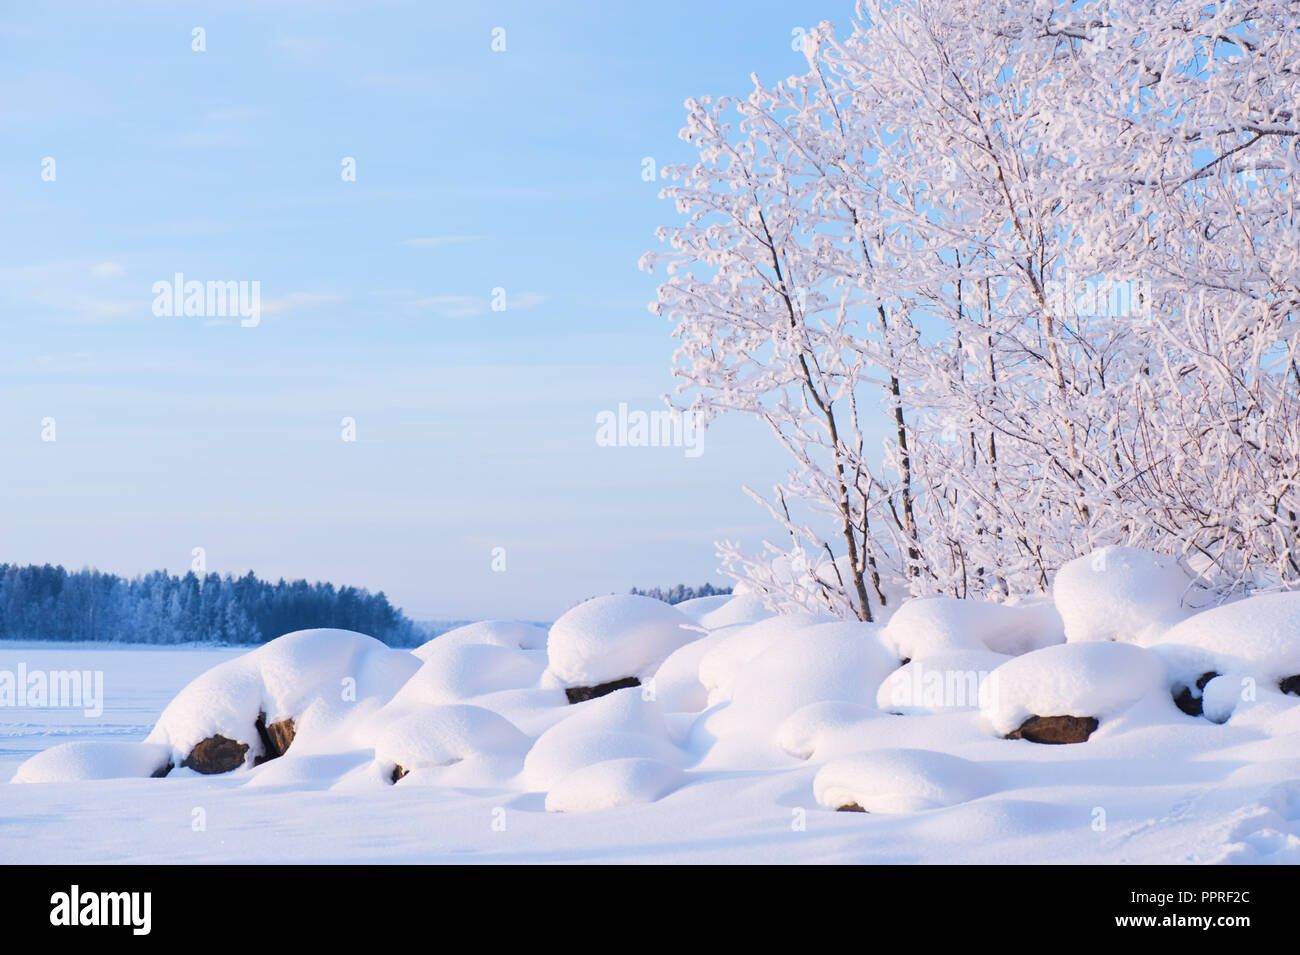 Winter view of lake shore. Newly fallen snow covering stones and trees. Stock Photo